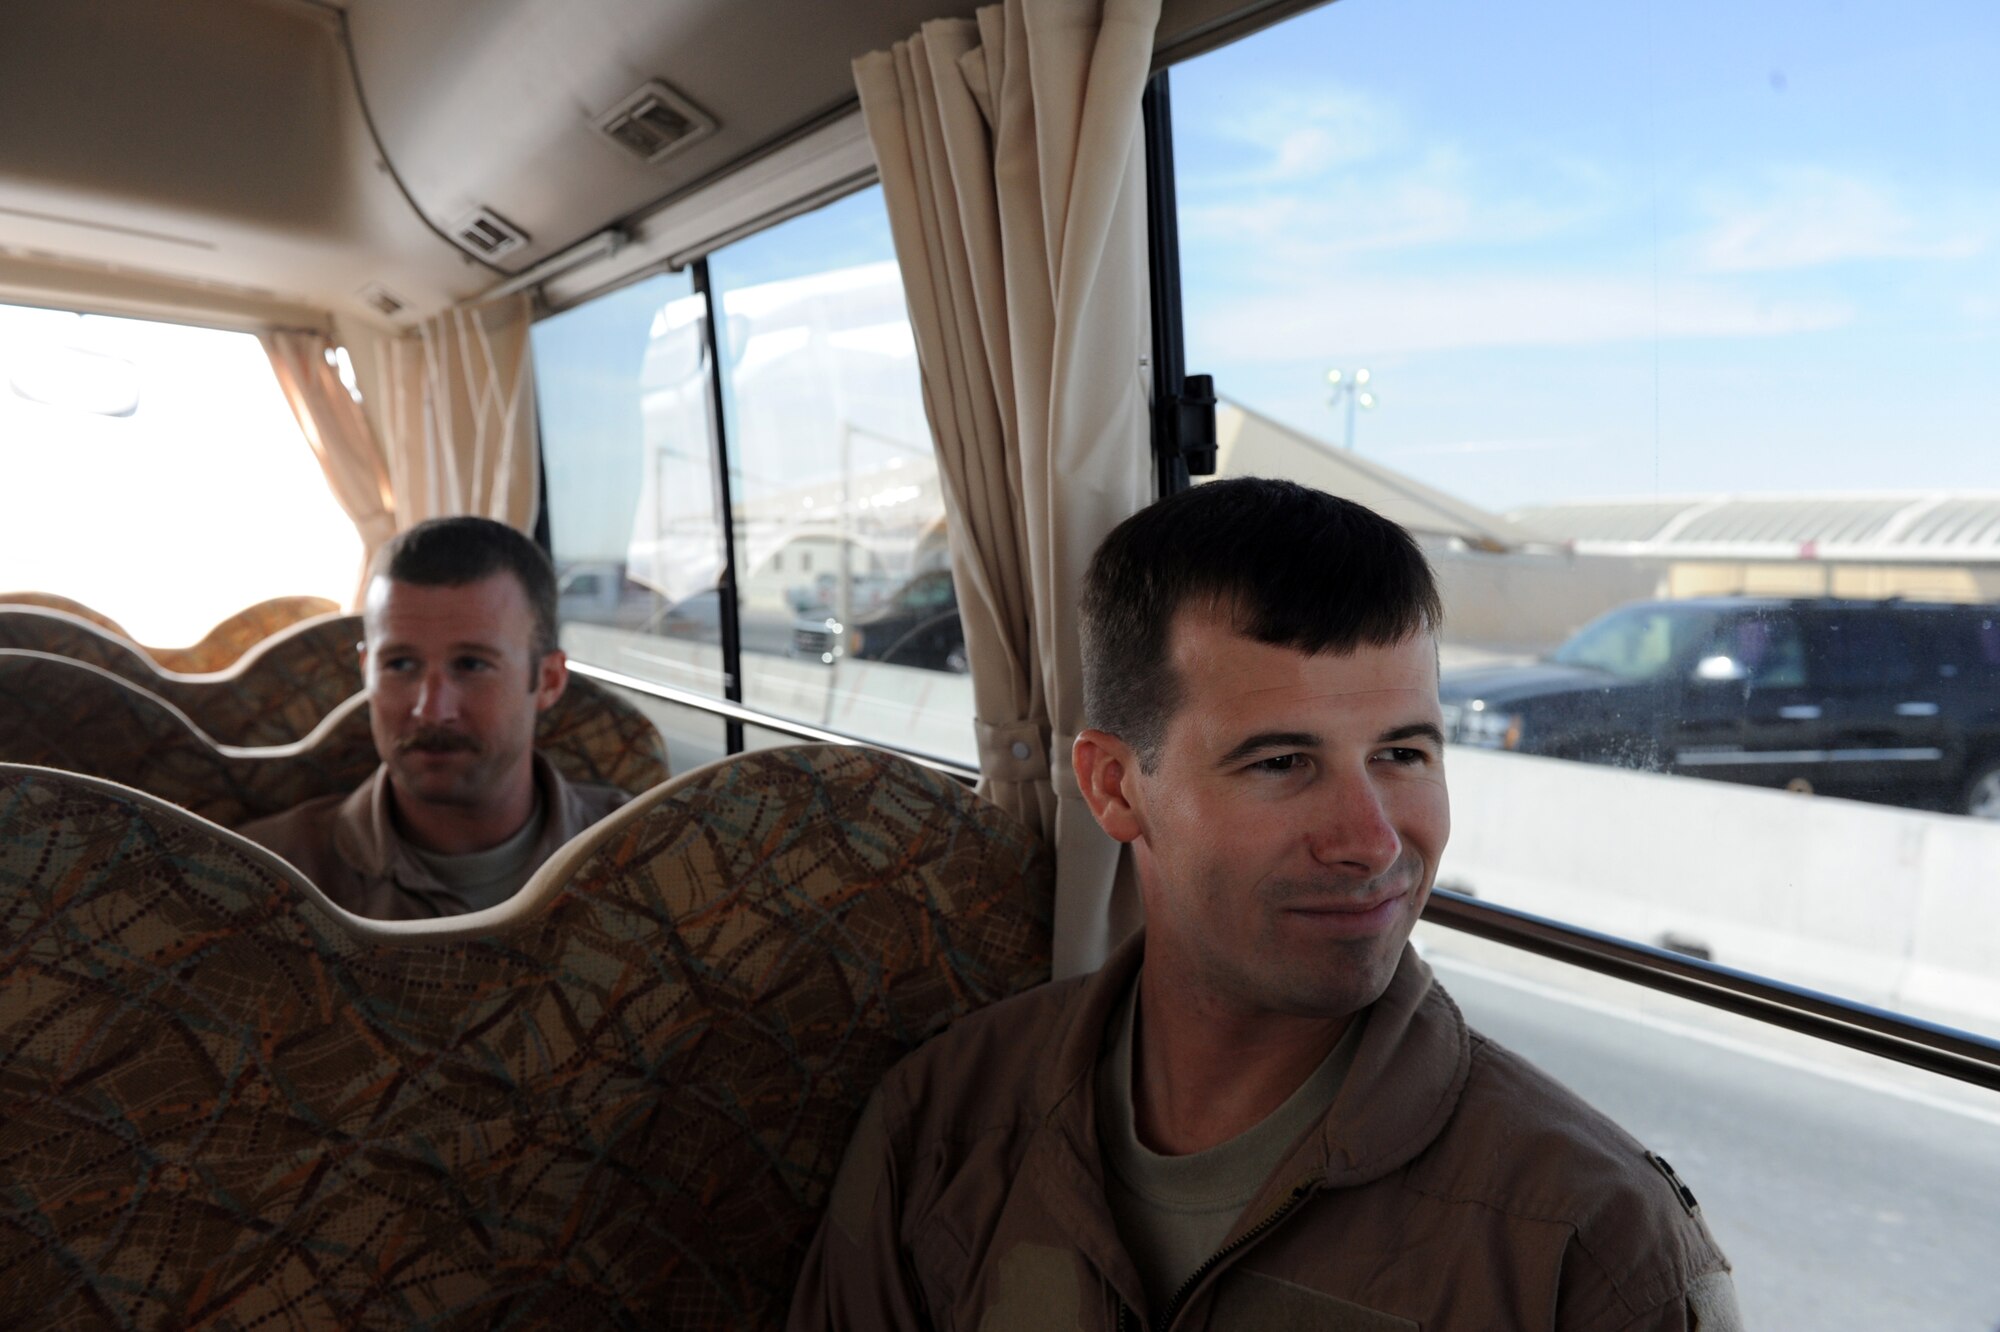 Captain Conor ''Fiero'' Daugherty, a B-1B Lancer, defensive systems operator, and Capt. Jason '' Rubbin'' Wright, a B-1B pilot, both assigned to the 37th Expeditionary Bomb Squadron, ride a crew bus to their awaiting aircraft prior to the last mission of their six-month deployment Jan. 23, 2010, in Southwest Asia. The 37th EBS aircrew flew more than 6,980 hours during their time here.  (U.S. Air Force photo/Staff Sgt. Manuel J. Martinez/Released)